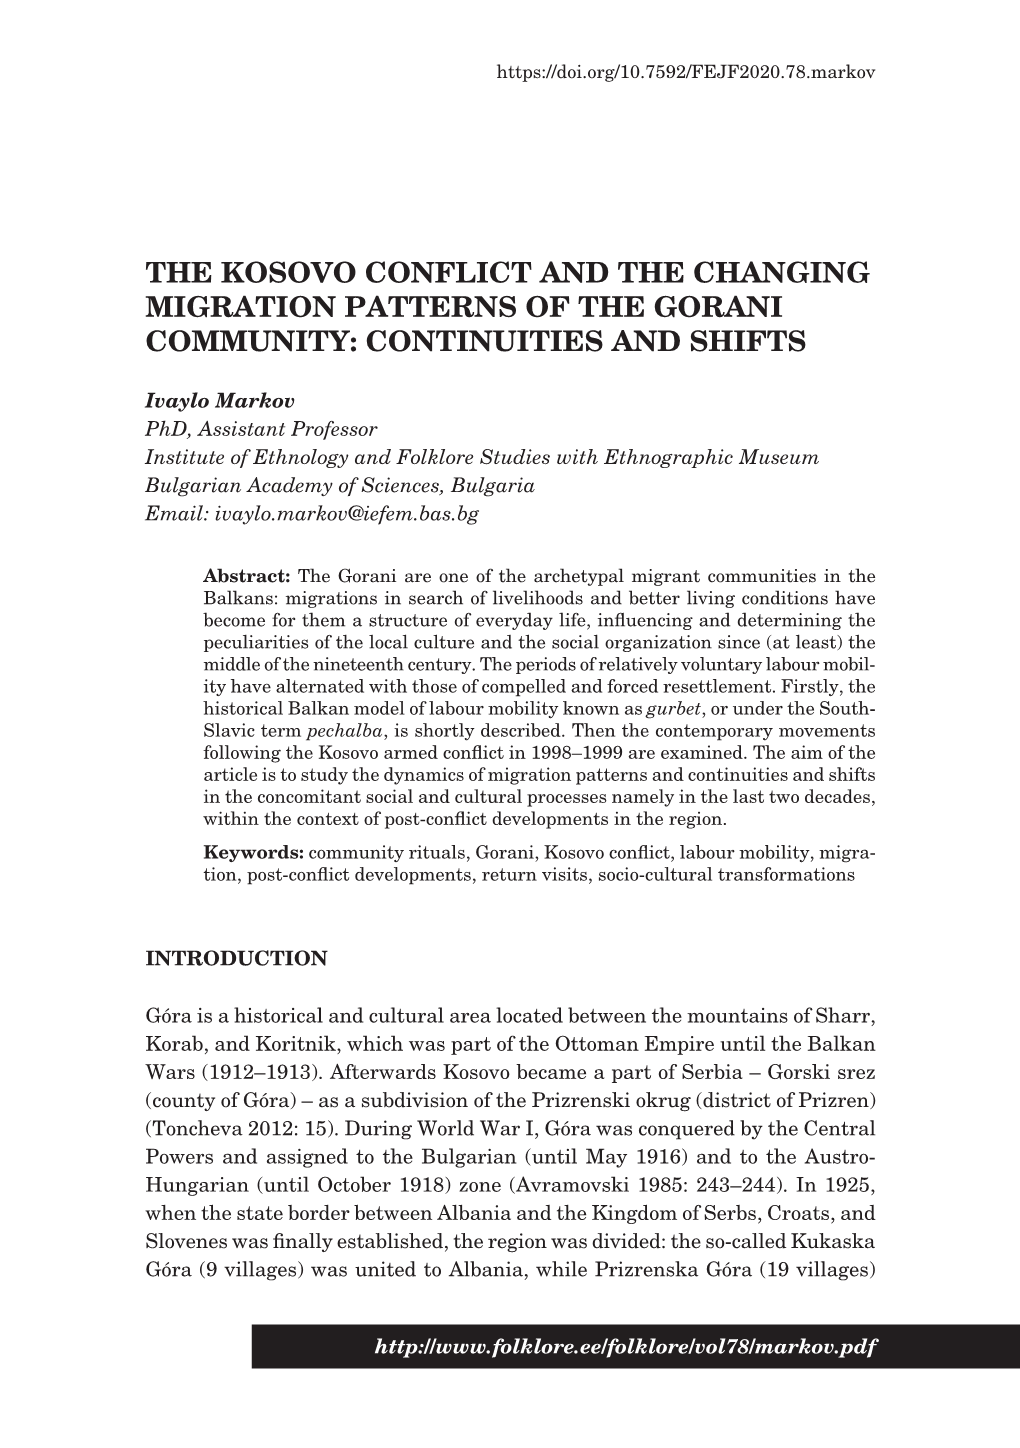 The Kosovo Conflict and the Changing Migration Patterns of the Gorani Community: Continuities and Shifts